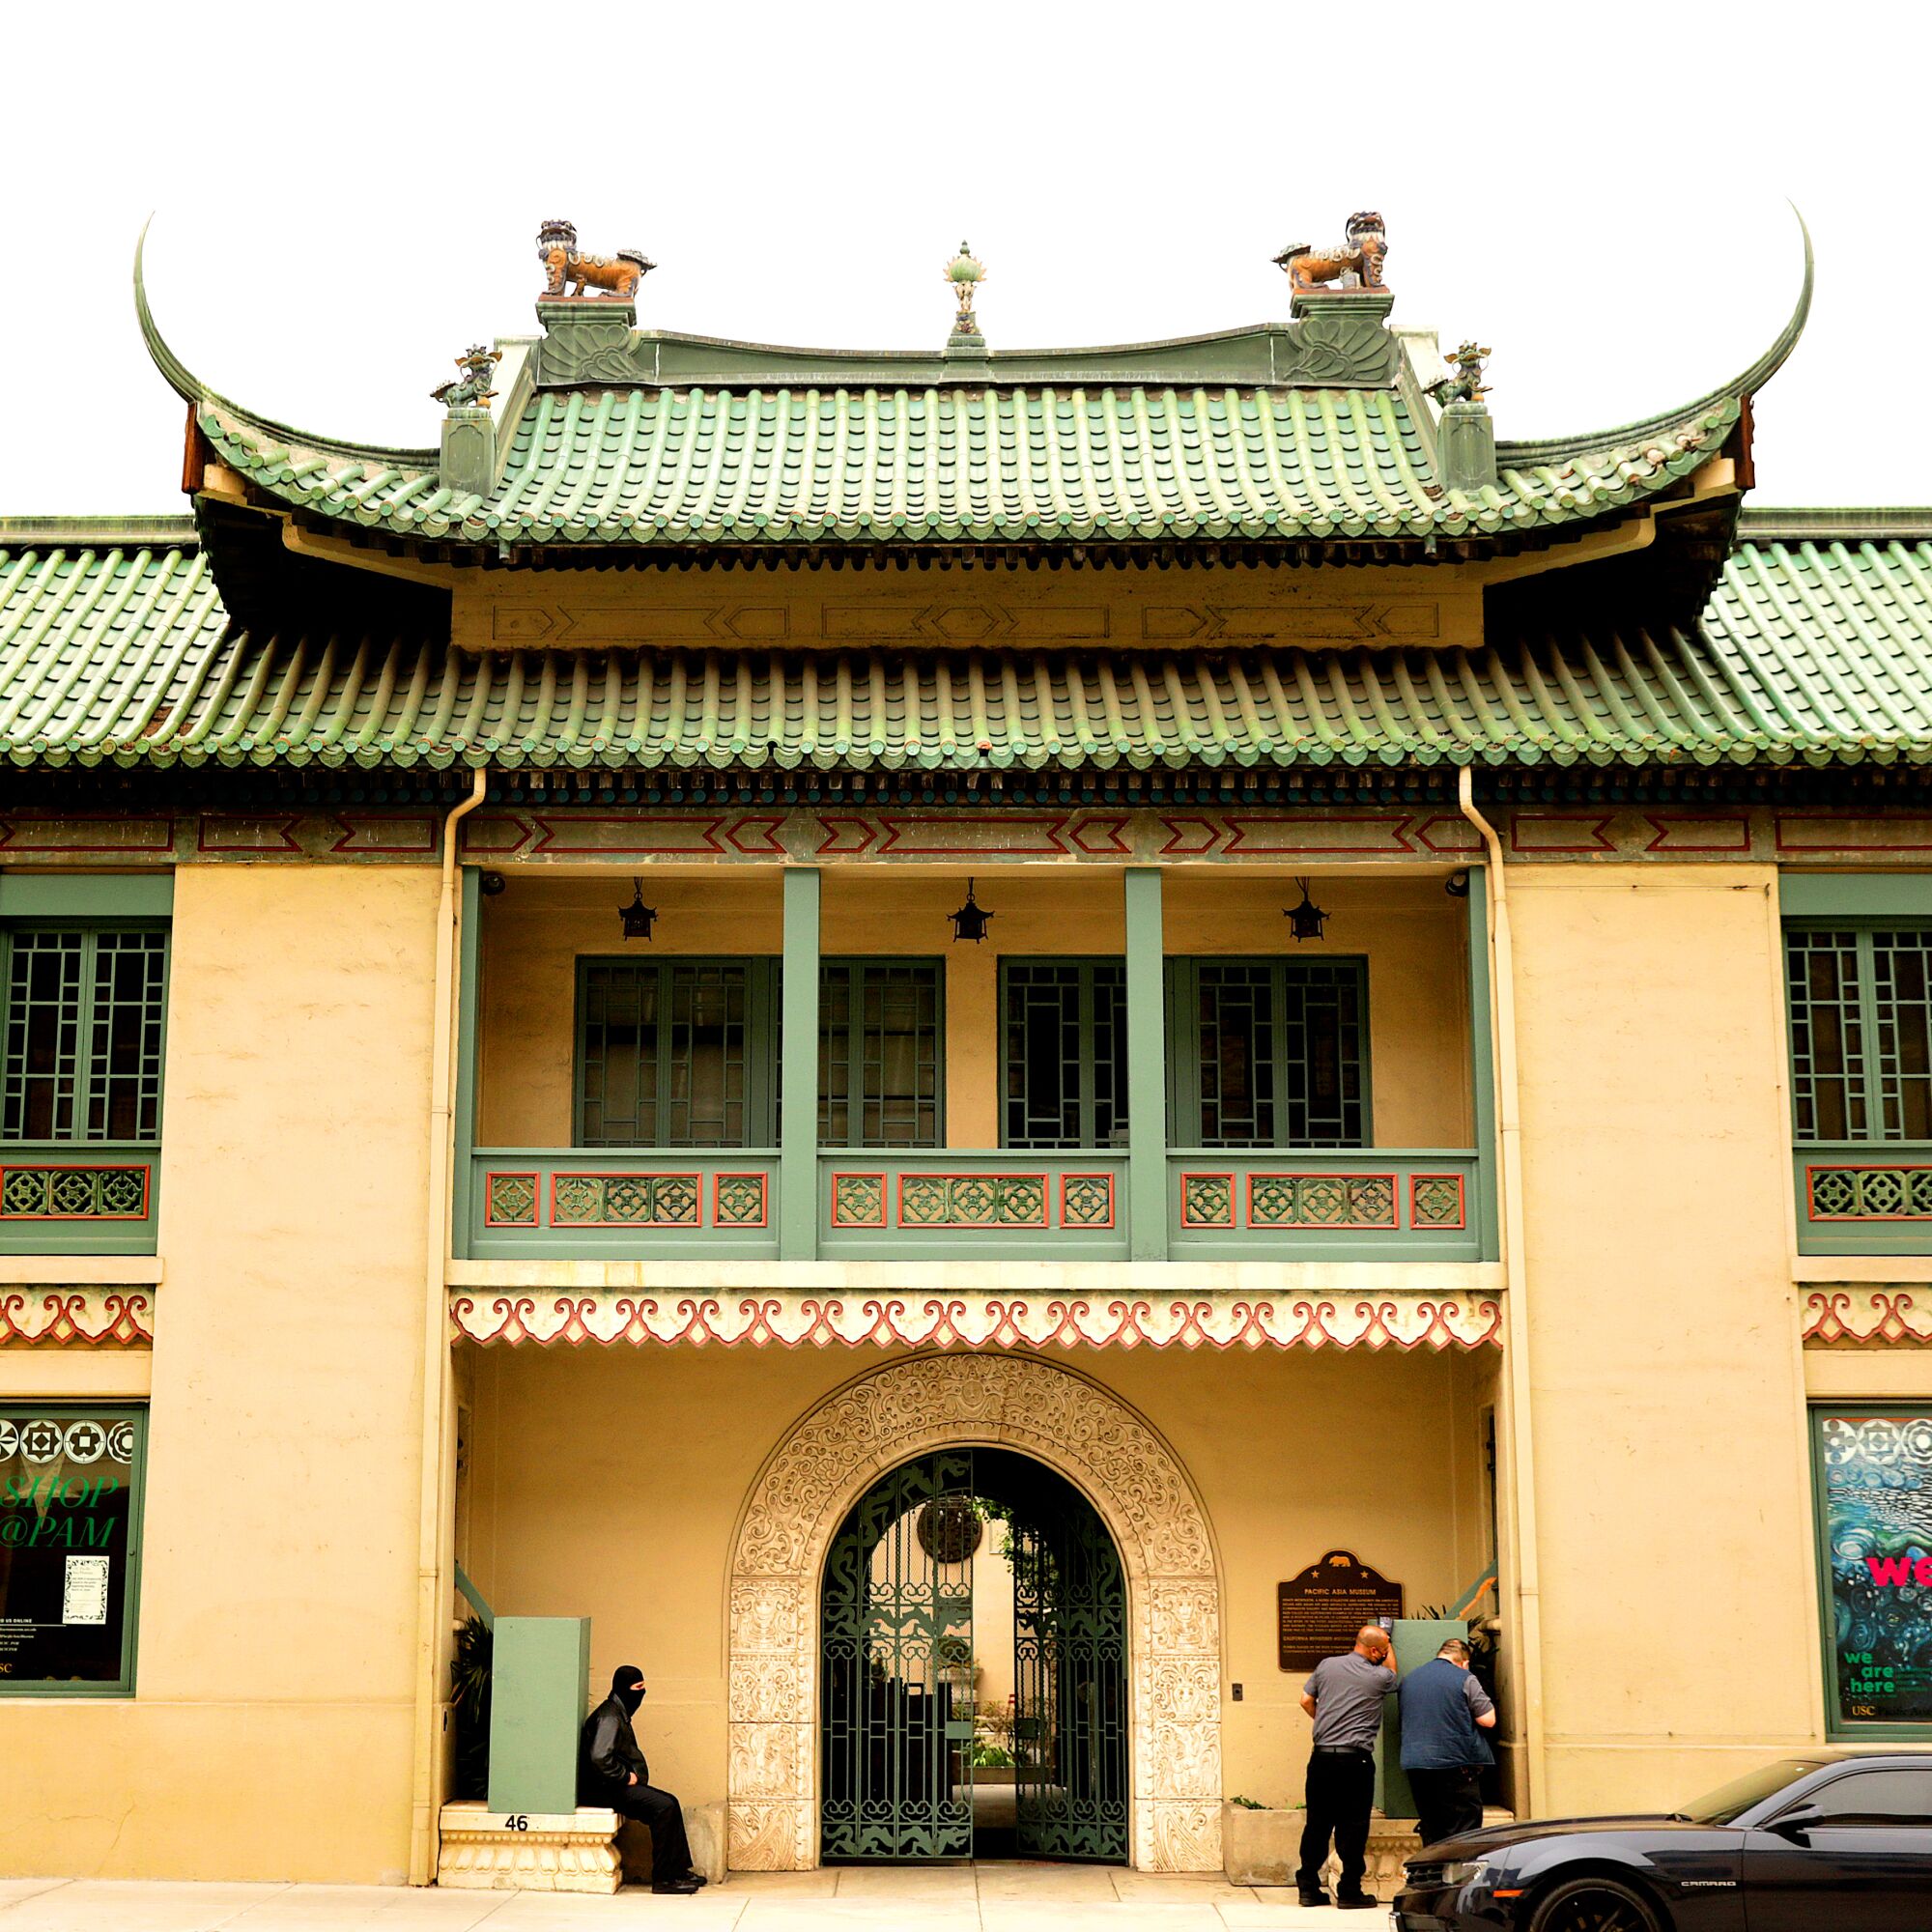  USC's Pacific Asia Museum features a green tile roof.